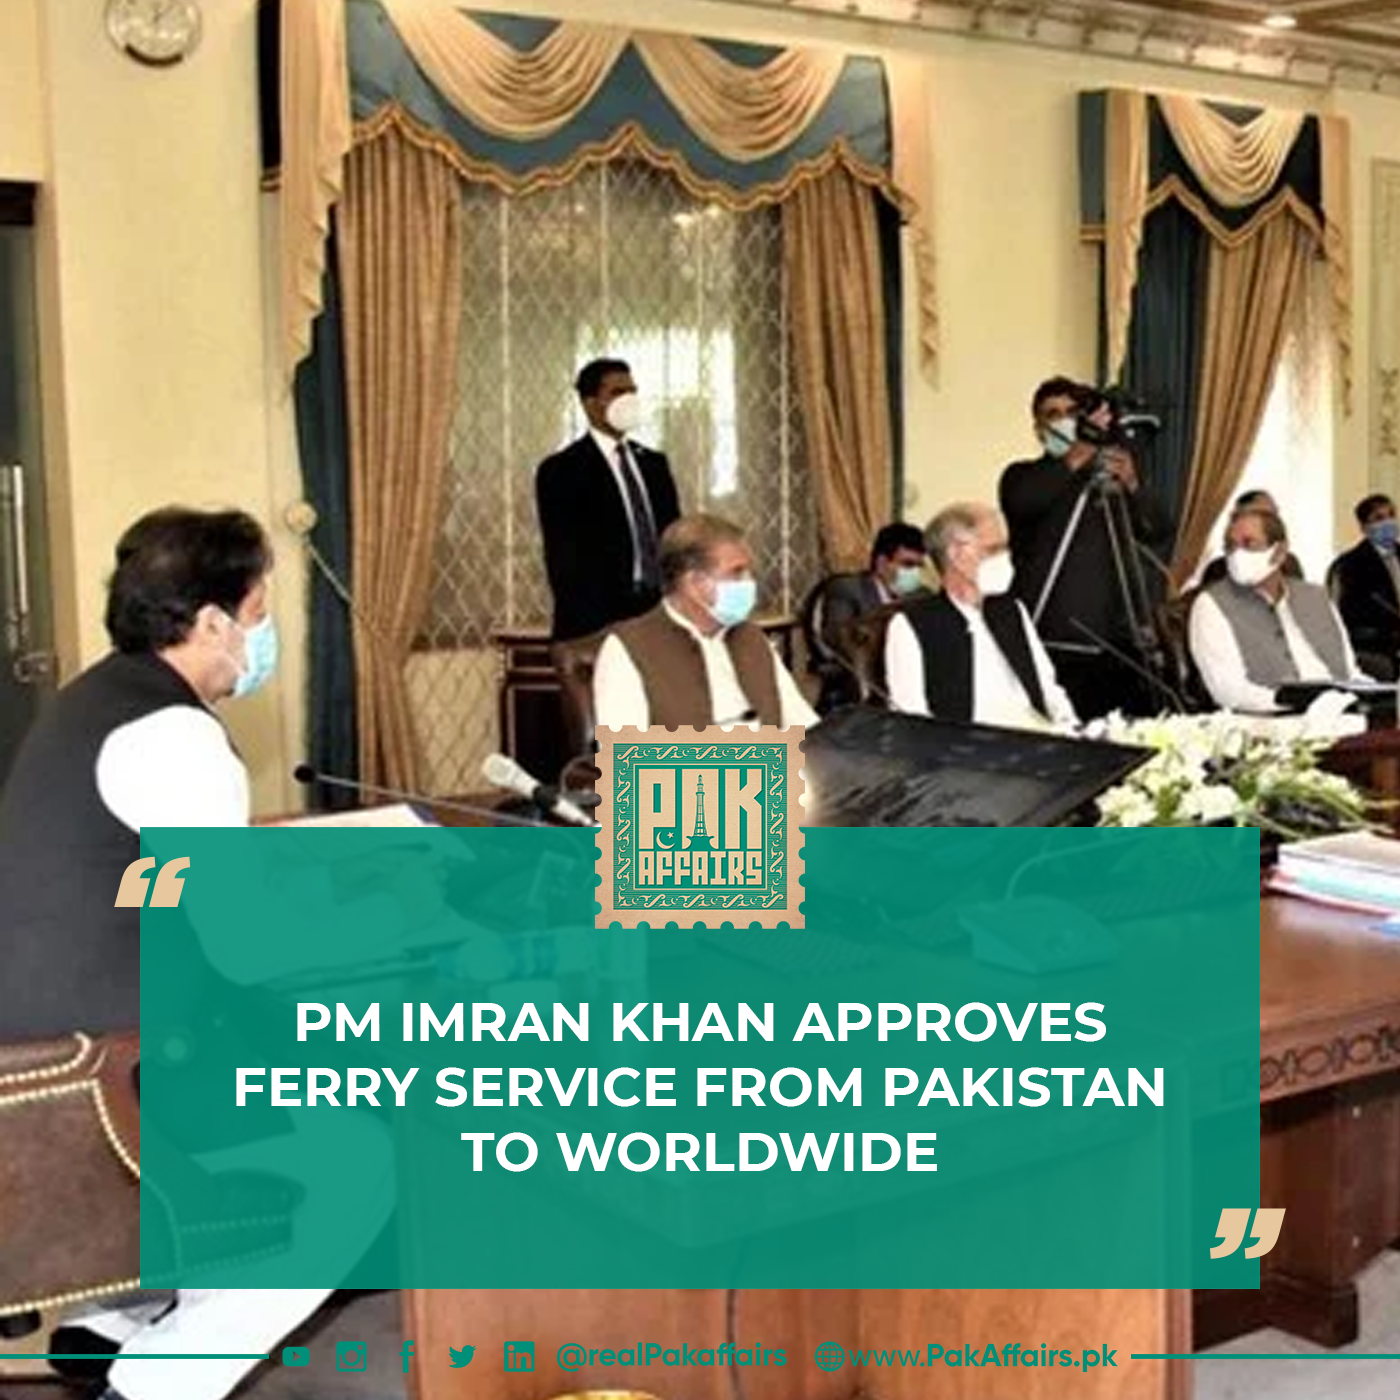 PM Imran Khan approves ferry service from Pakistan to worldwide